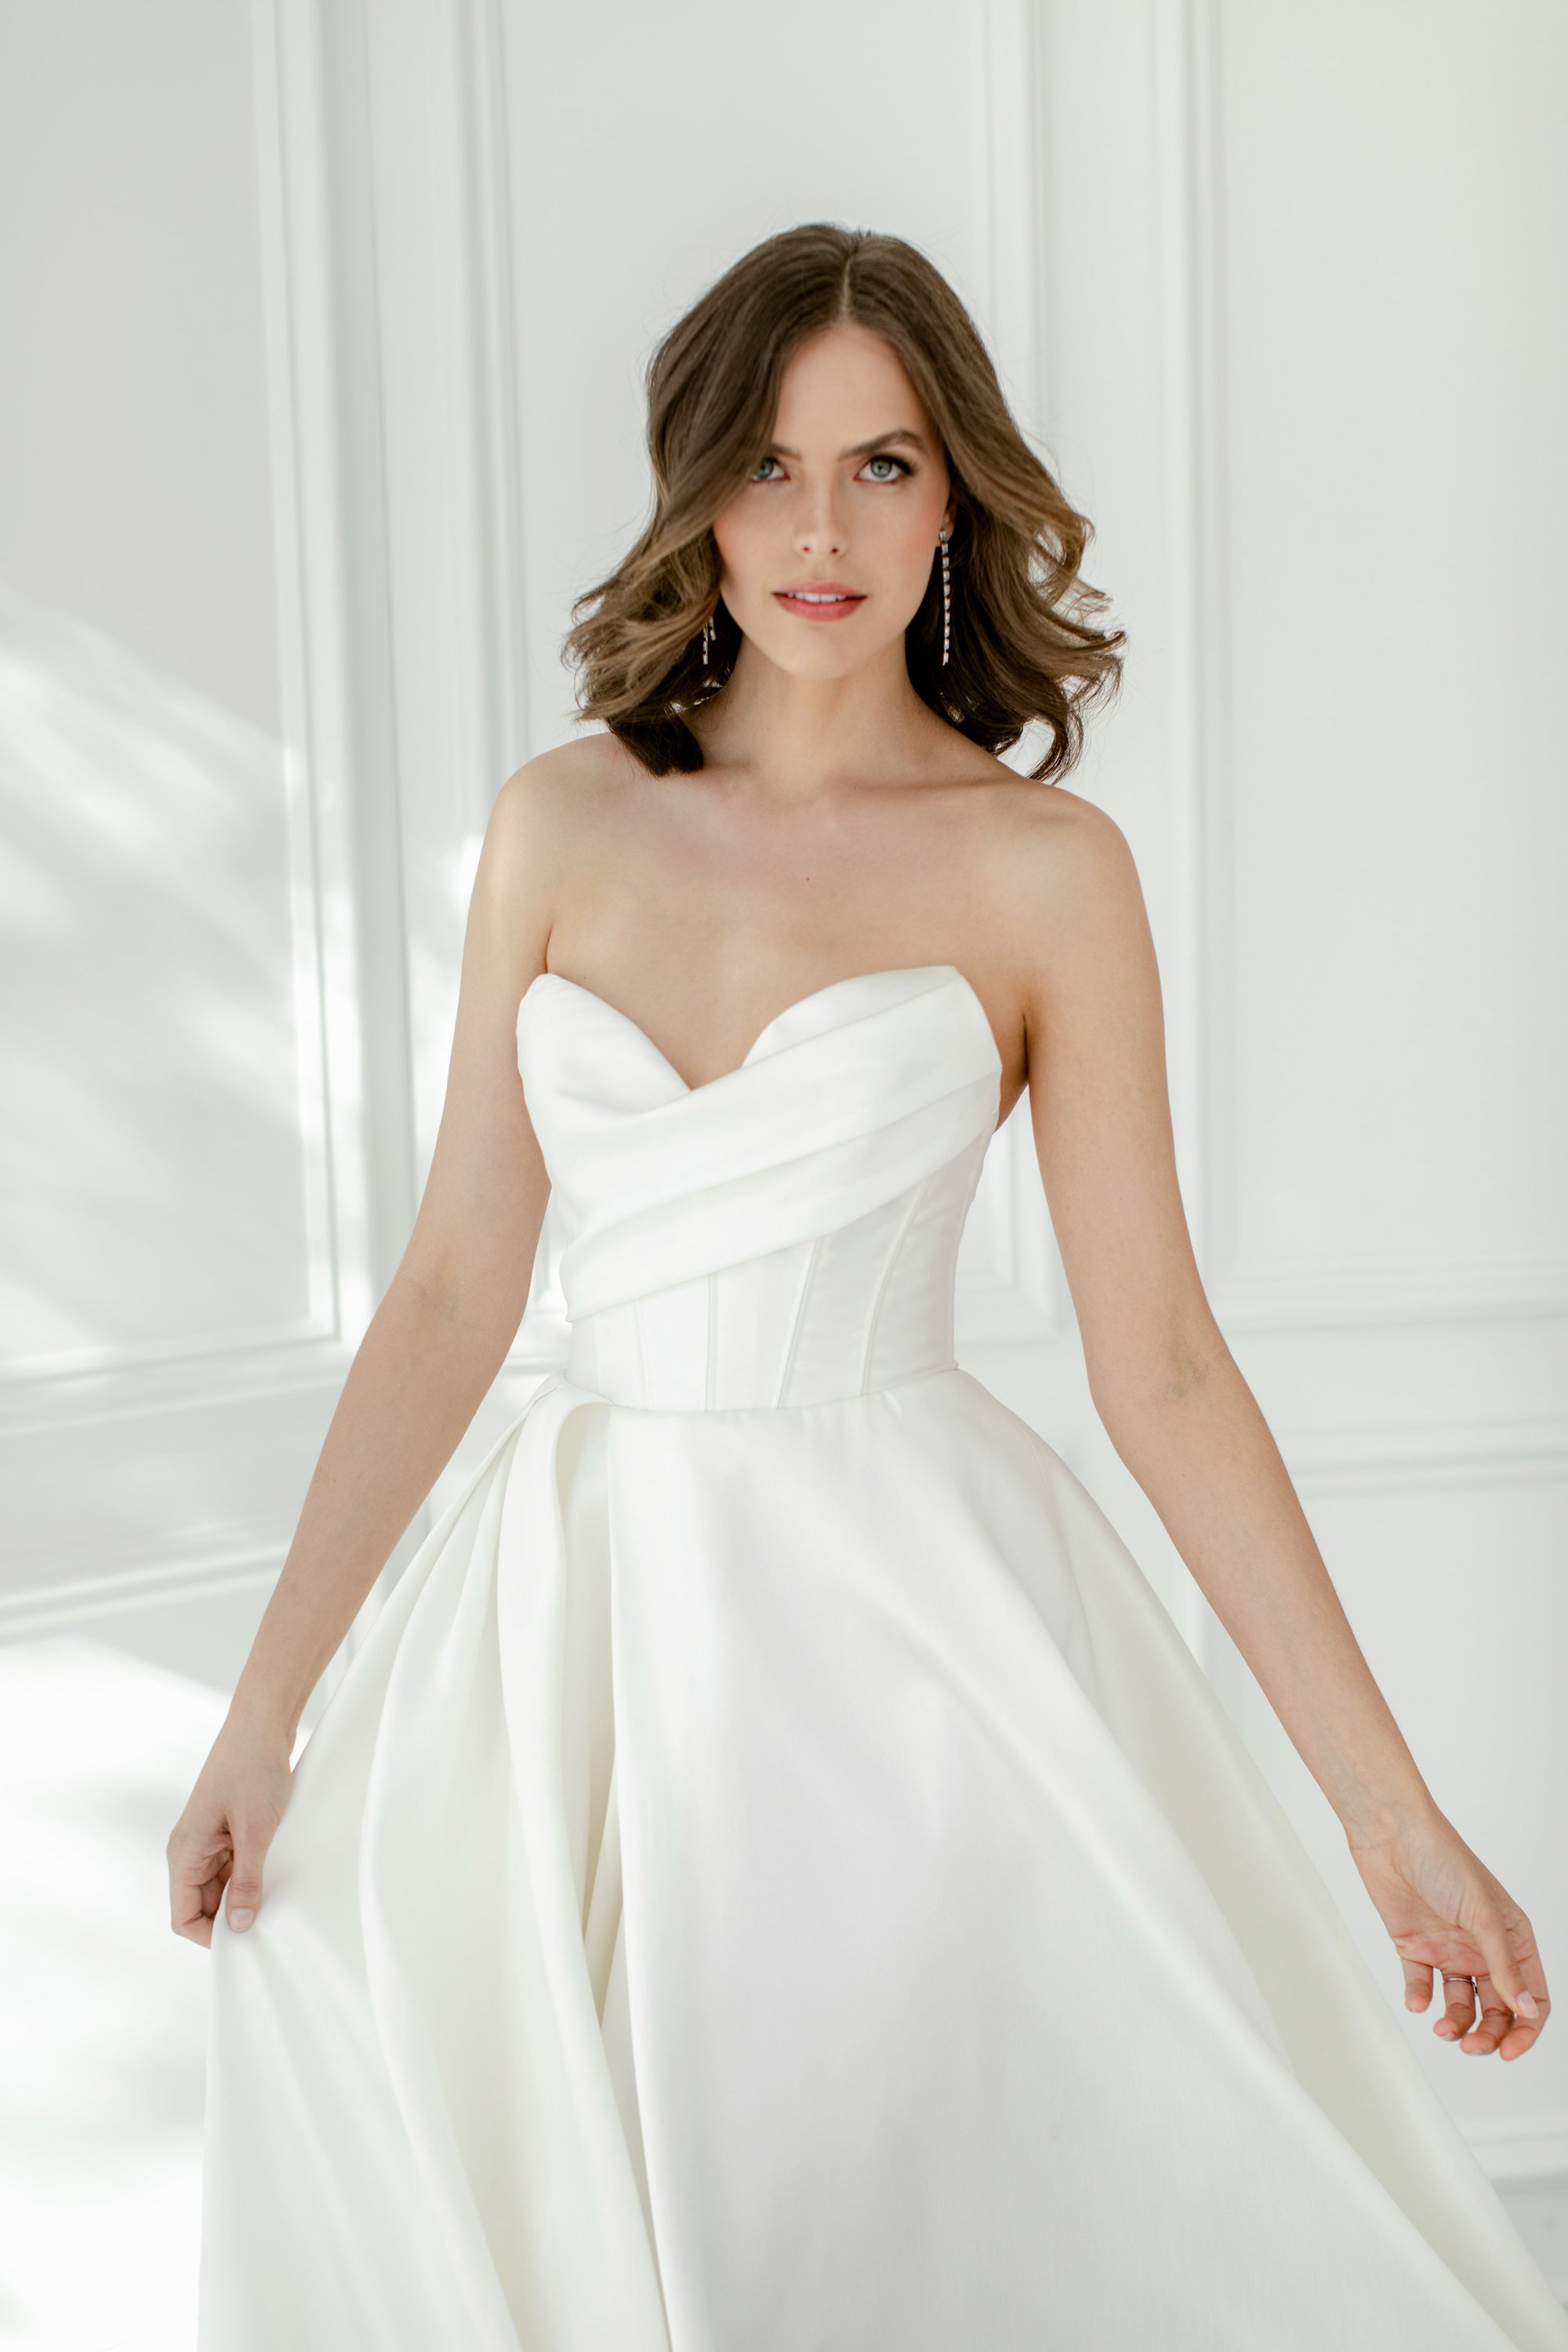 Strapless Ball Gown Wedding Dress With A Corset Bodice, Front Slit And Back  Bow